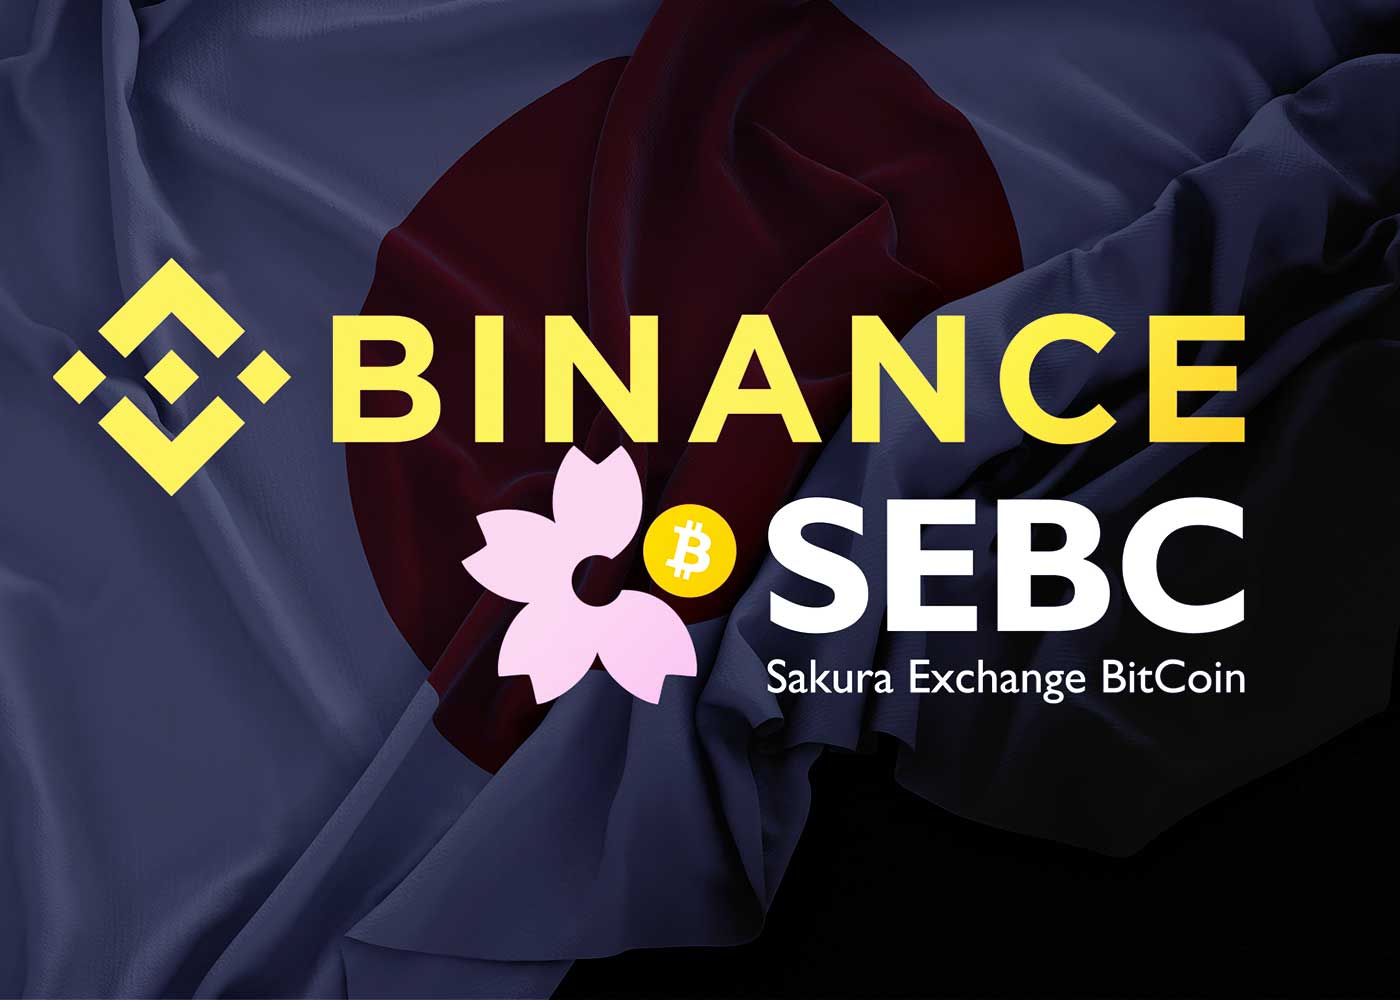 Binance-Prepares-for-Official-Launch-of-Binance-Japan-After-Sakura-Exchange-Bitcoin-Acquisition-